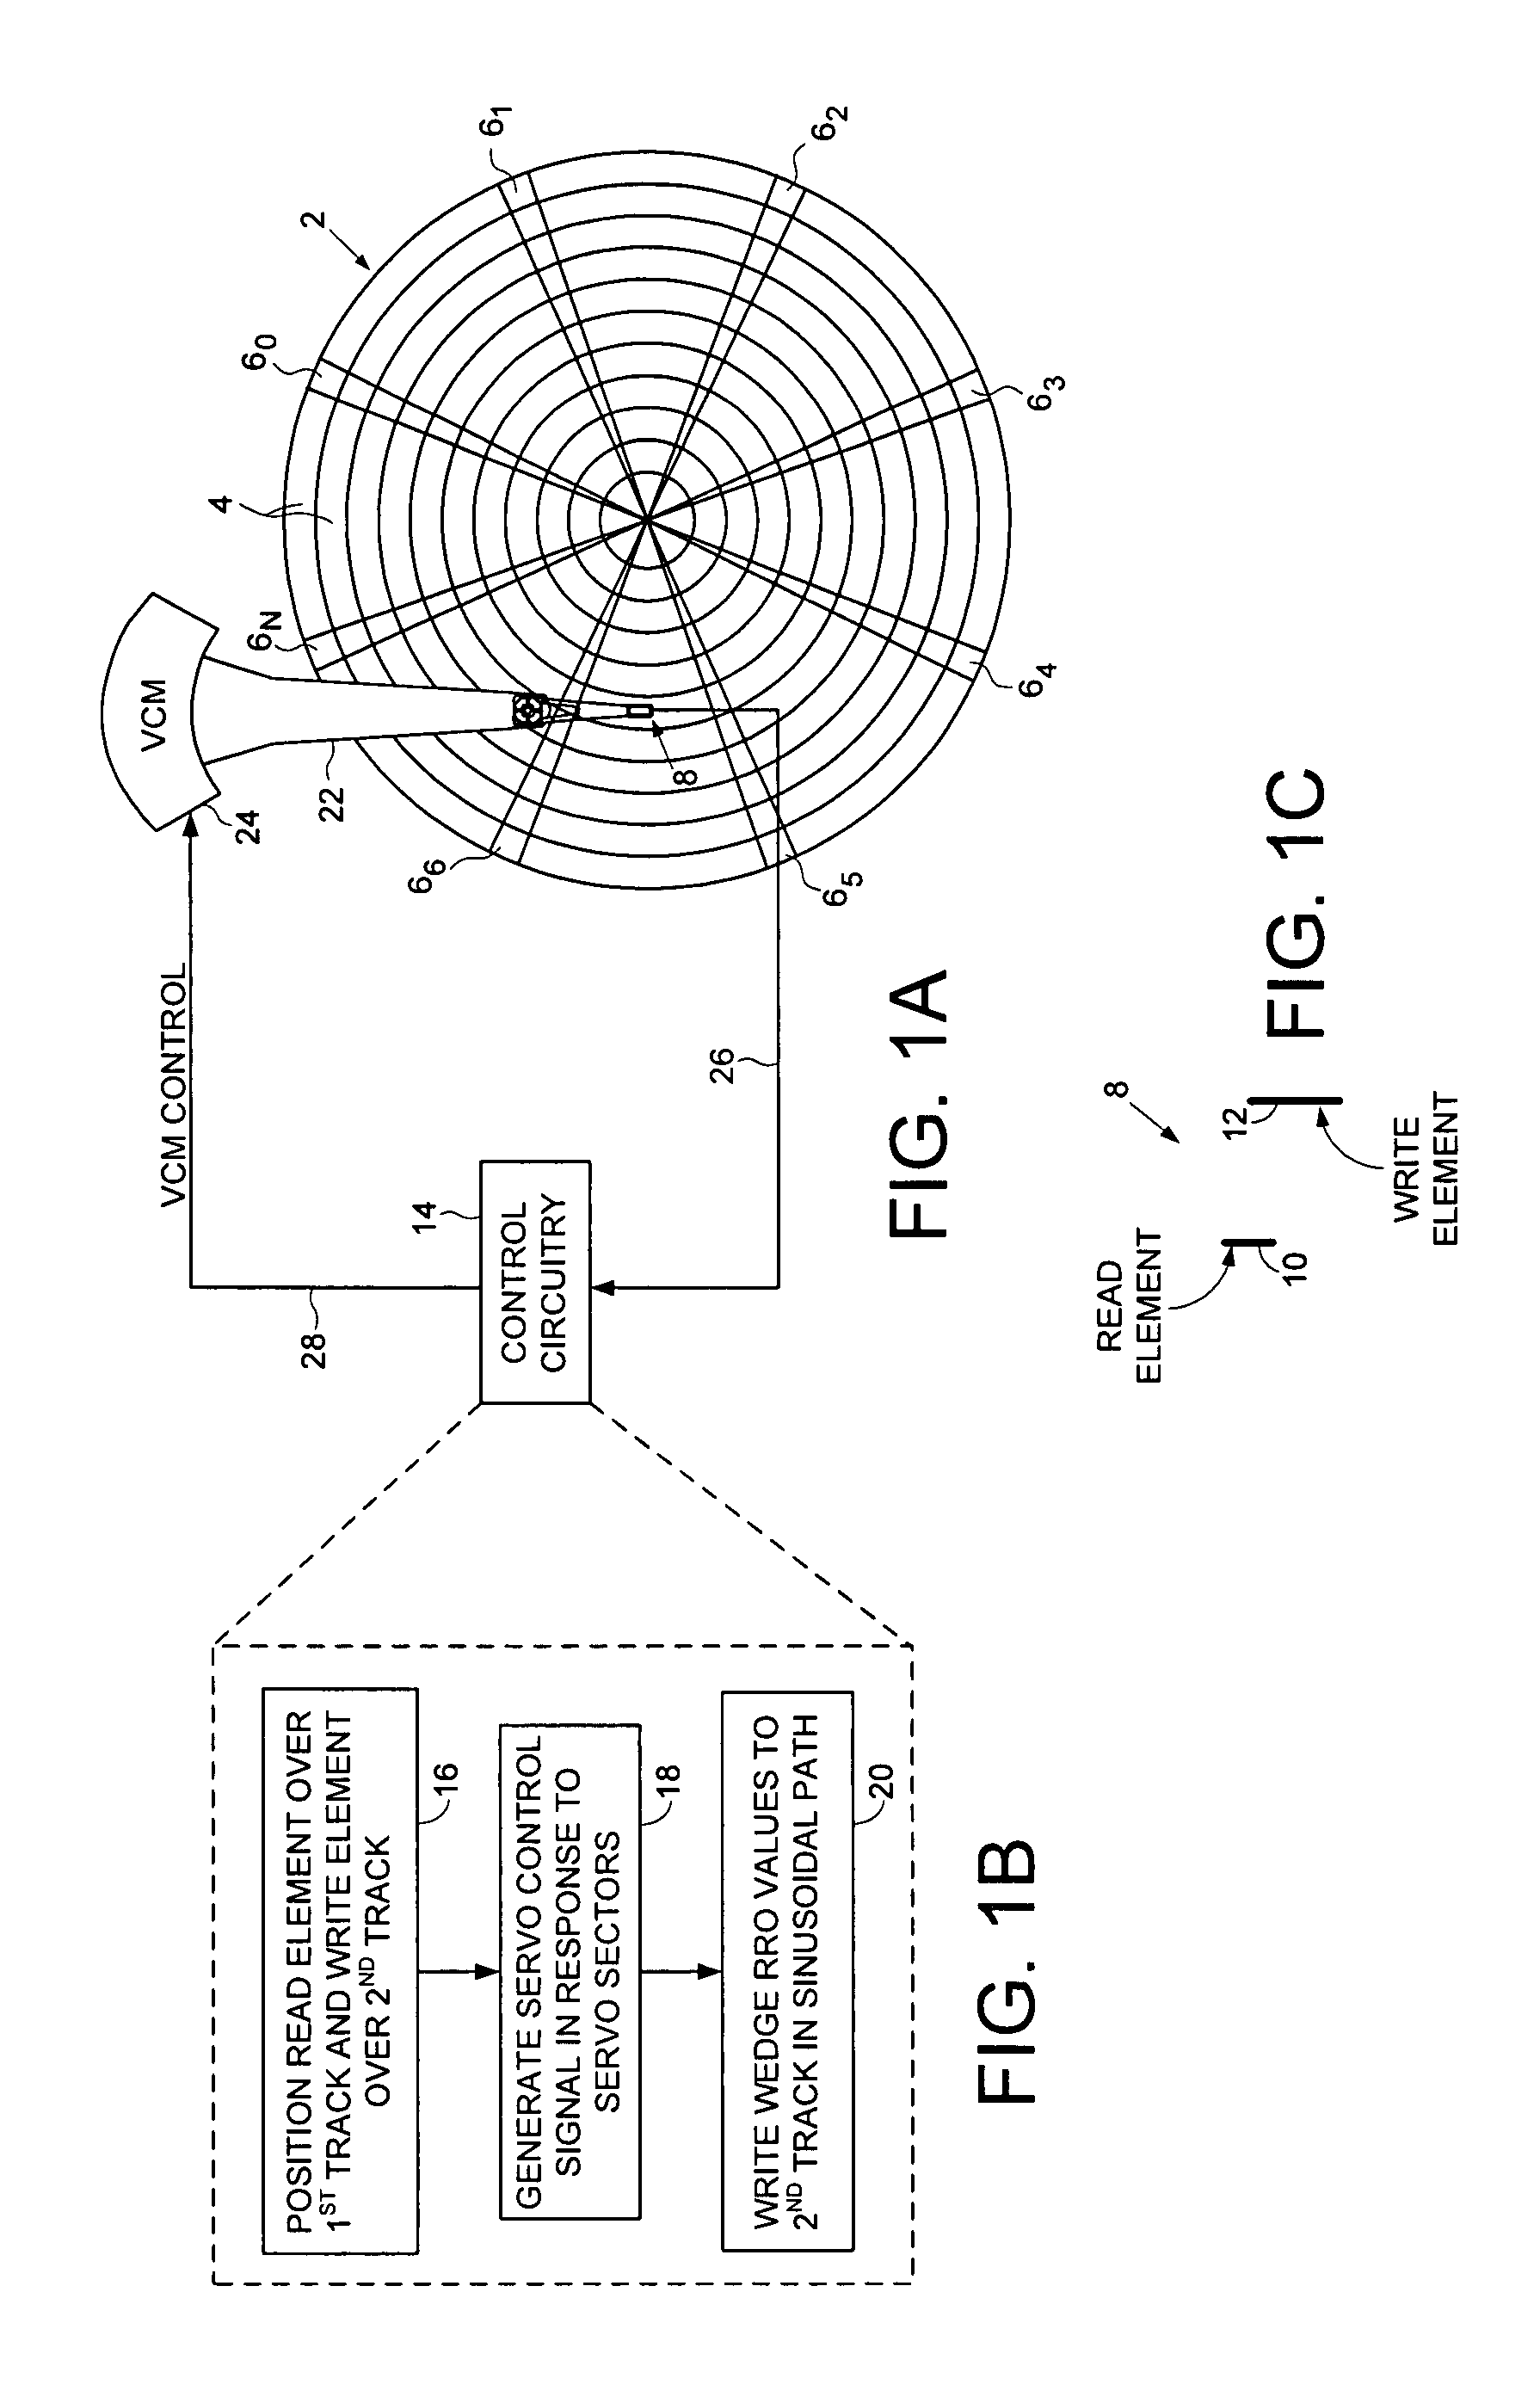 Disk drive writing wedge RRO data along a sinusoidal path to compensate for reader/writer offset